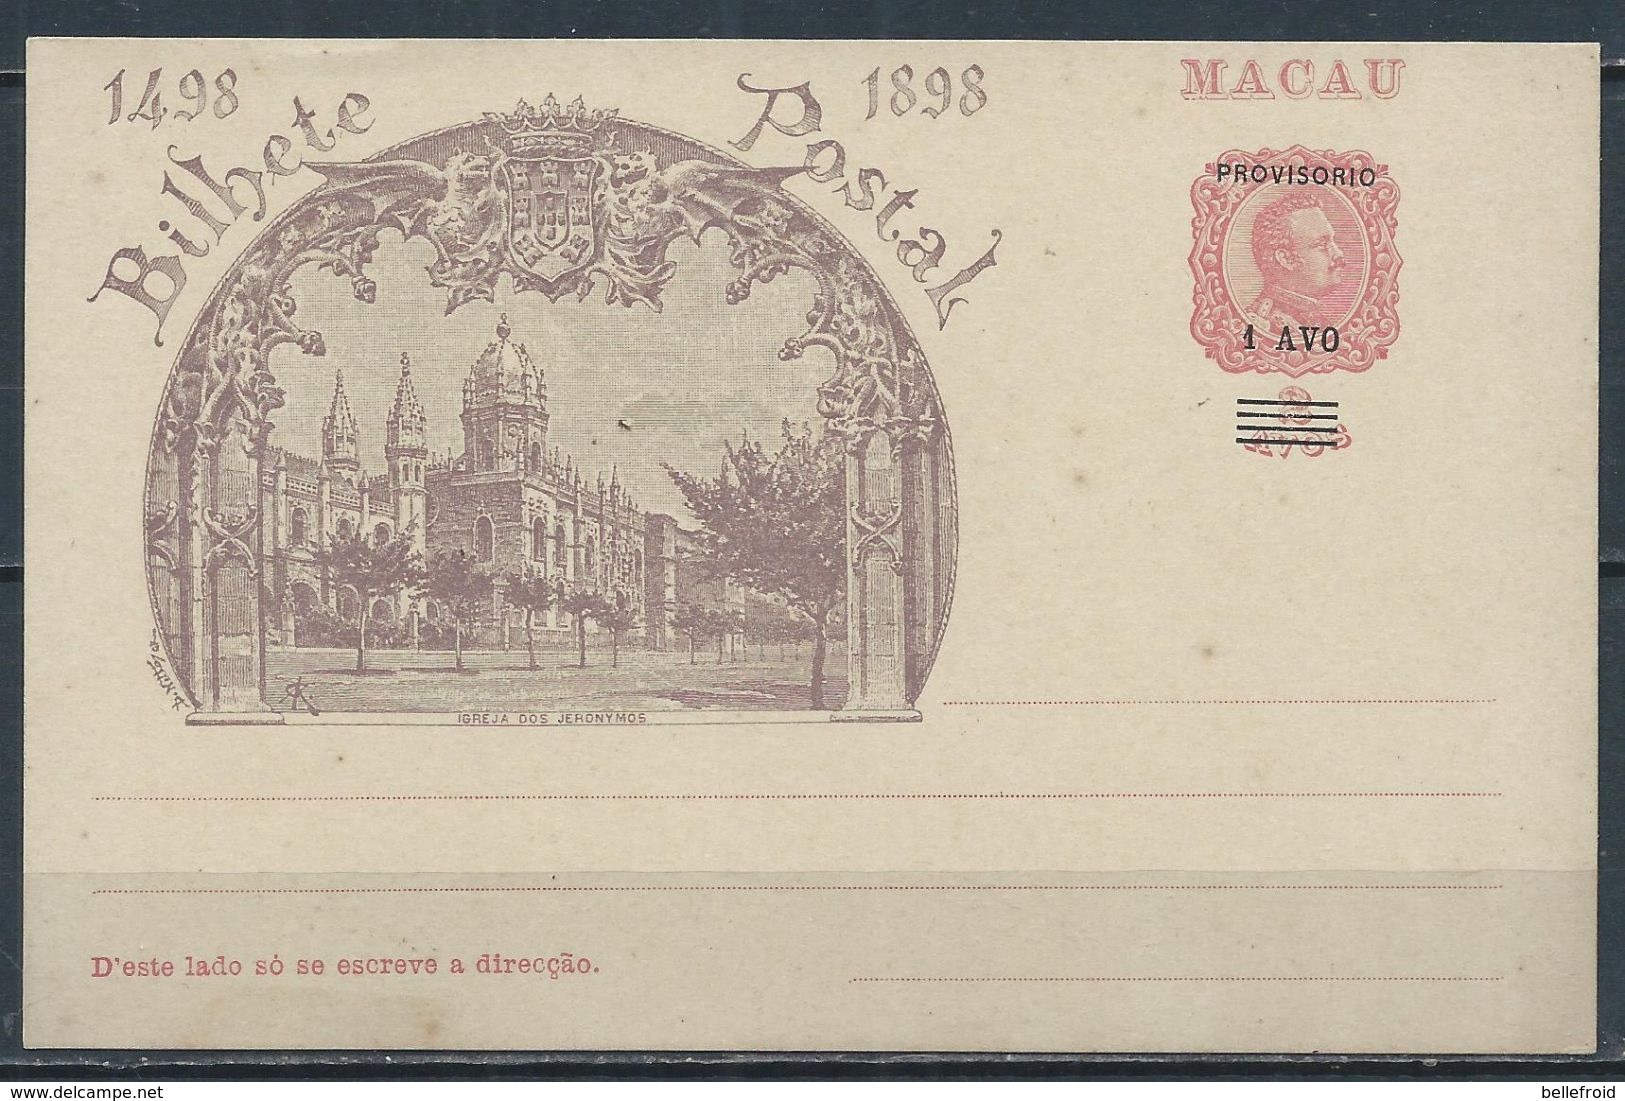 MACAO PS CARD 2 Avos RED Overprinted On 10 Reis PROVISORIO - Lettres & Documents